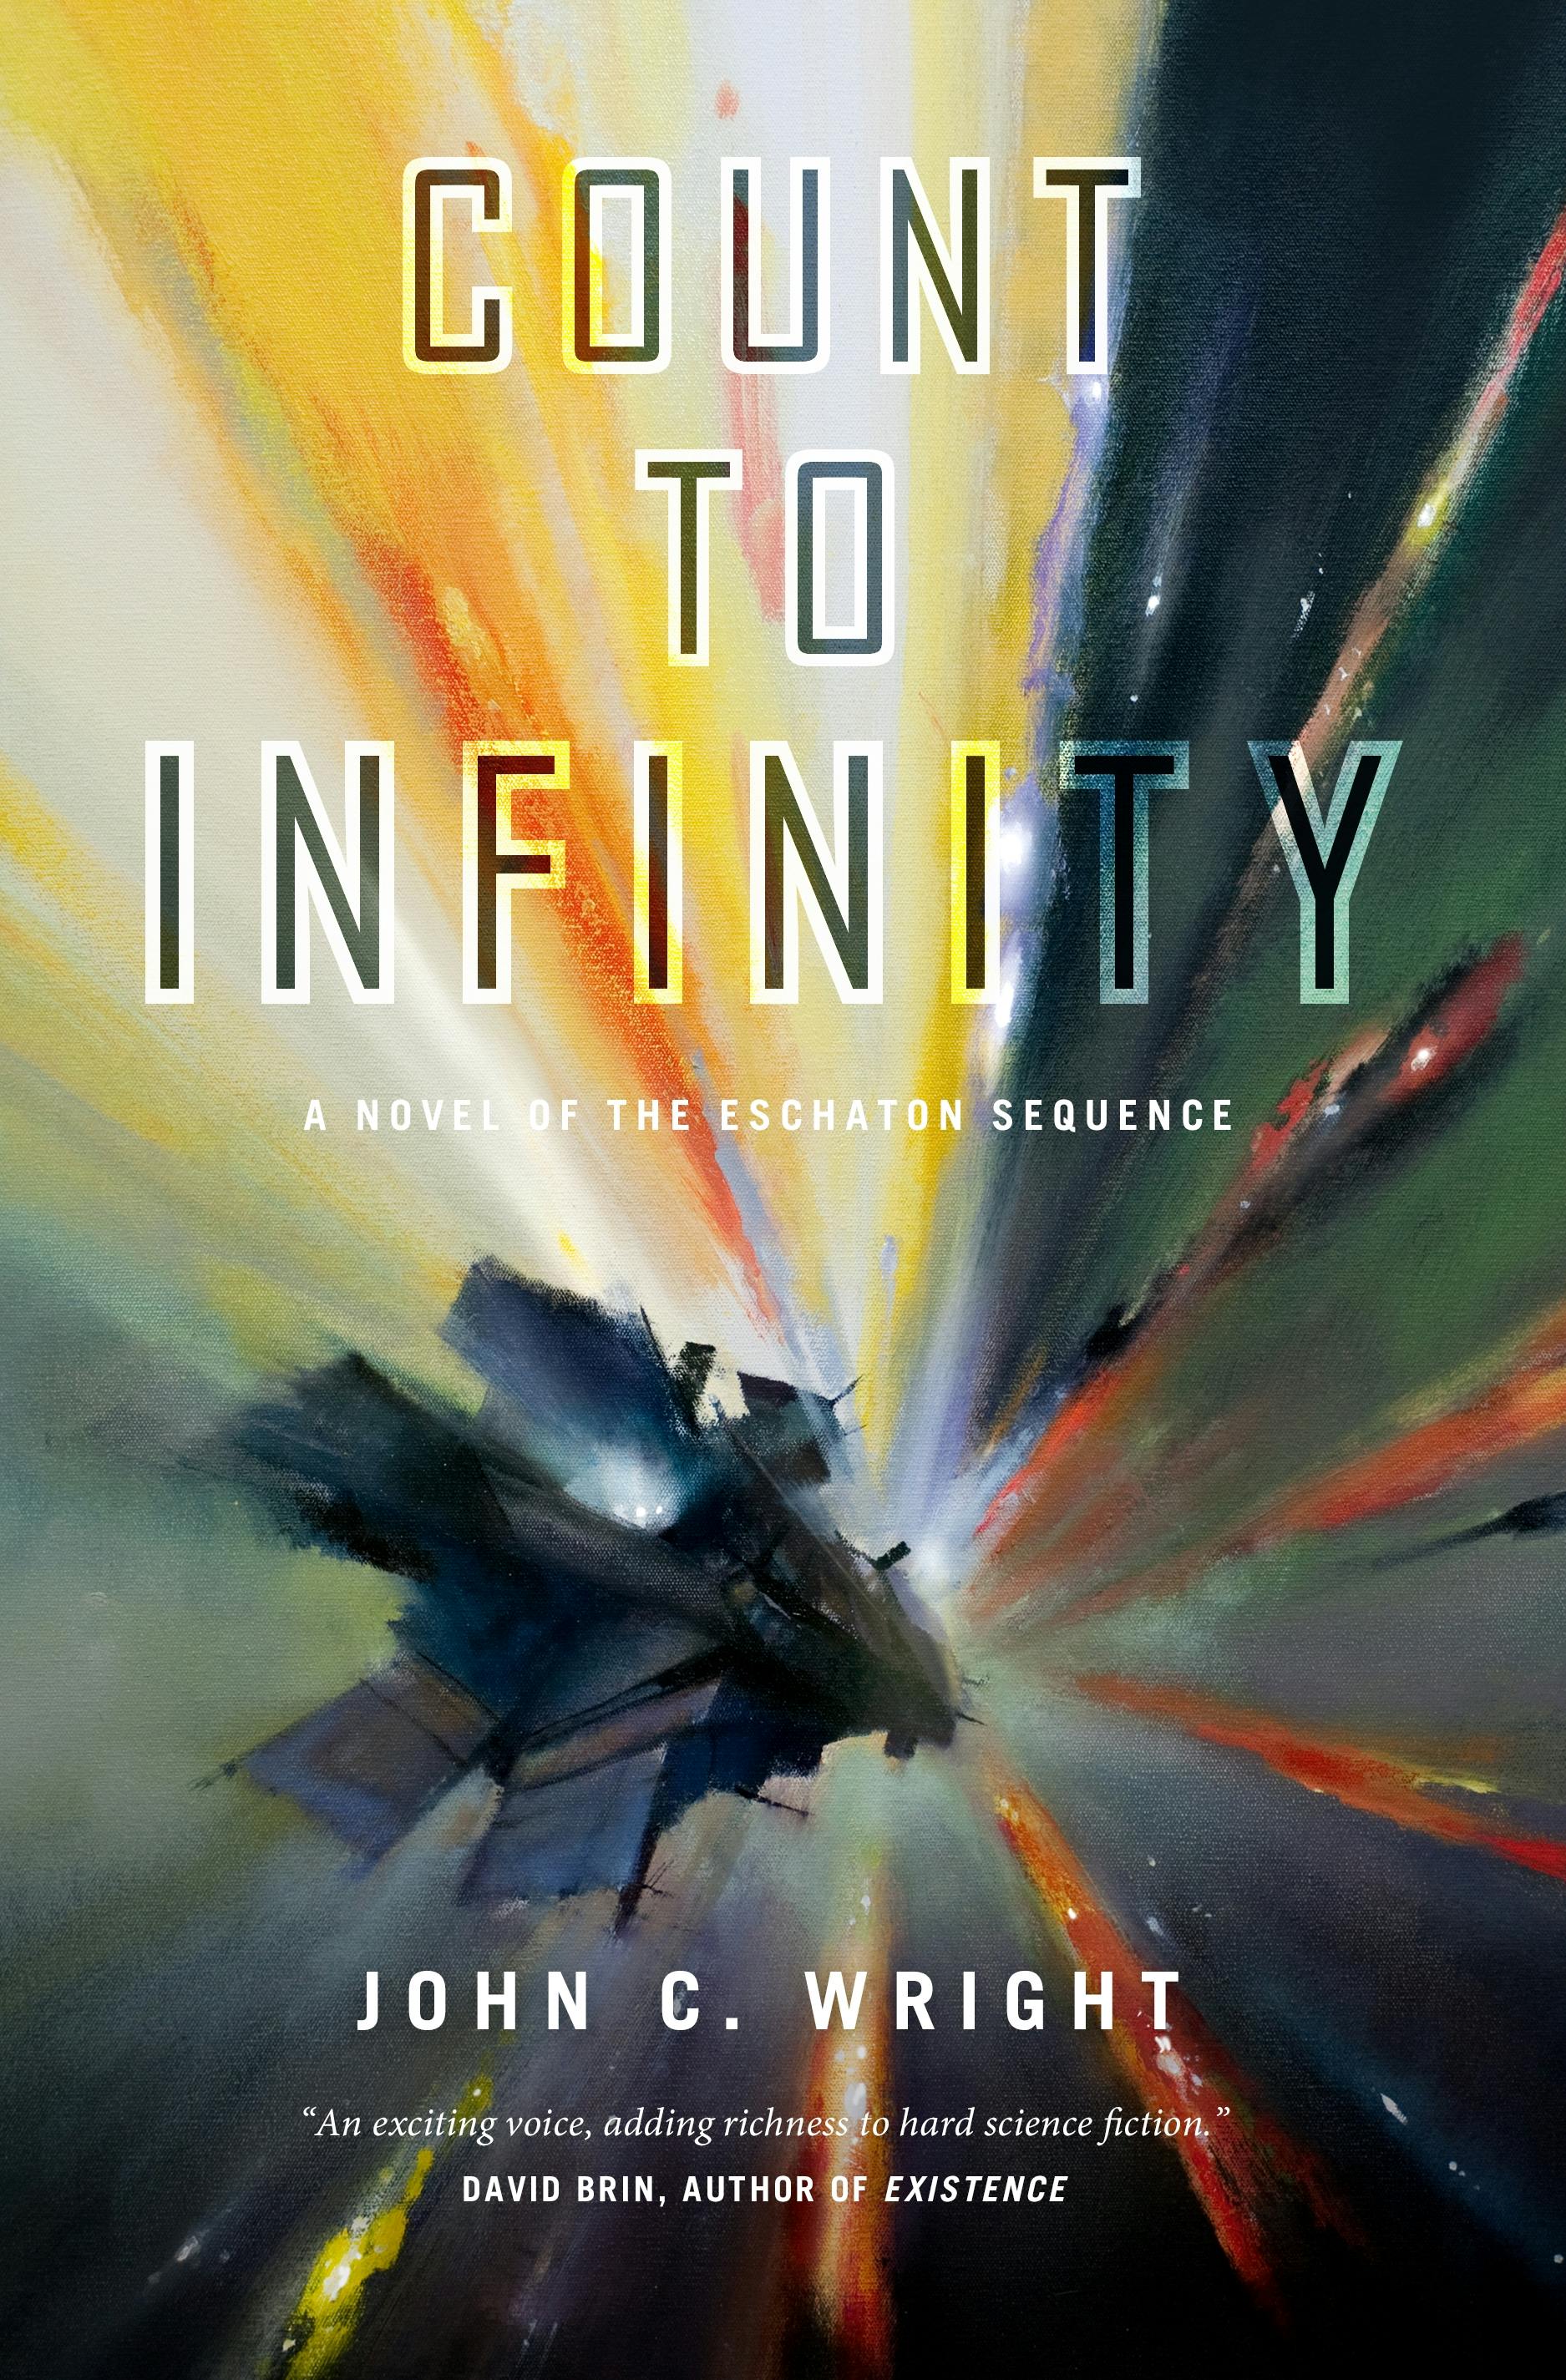 Cover for the book titled as: Count to Infinity